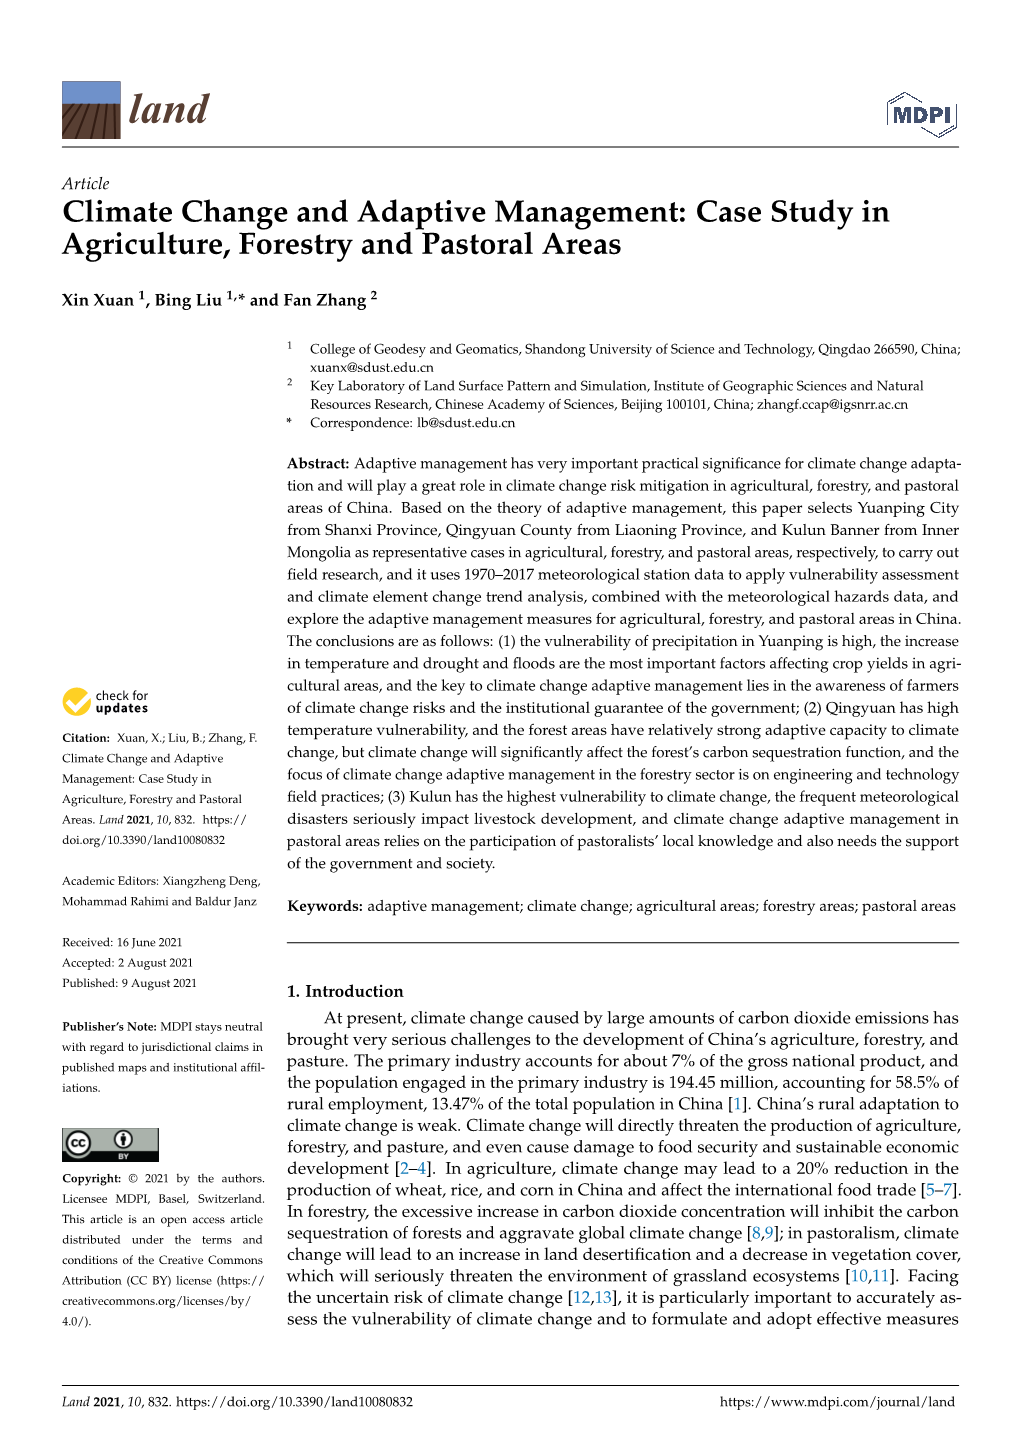 Climate Change and Adaptive Management: Case Study in Agriculture, Forestry and Pastoral Areas